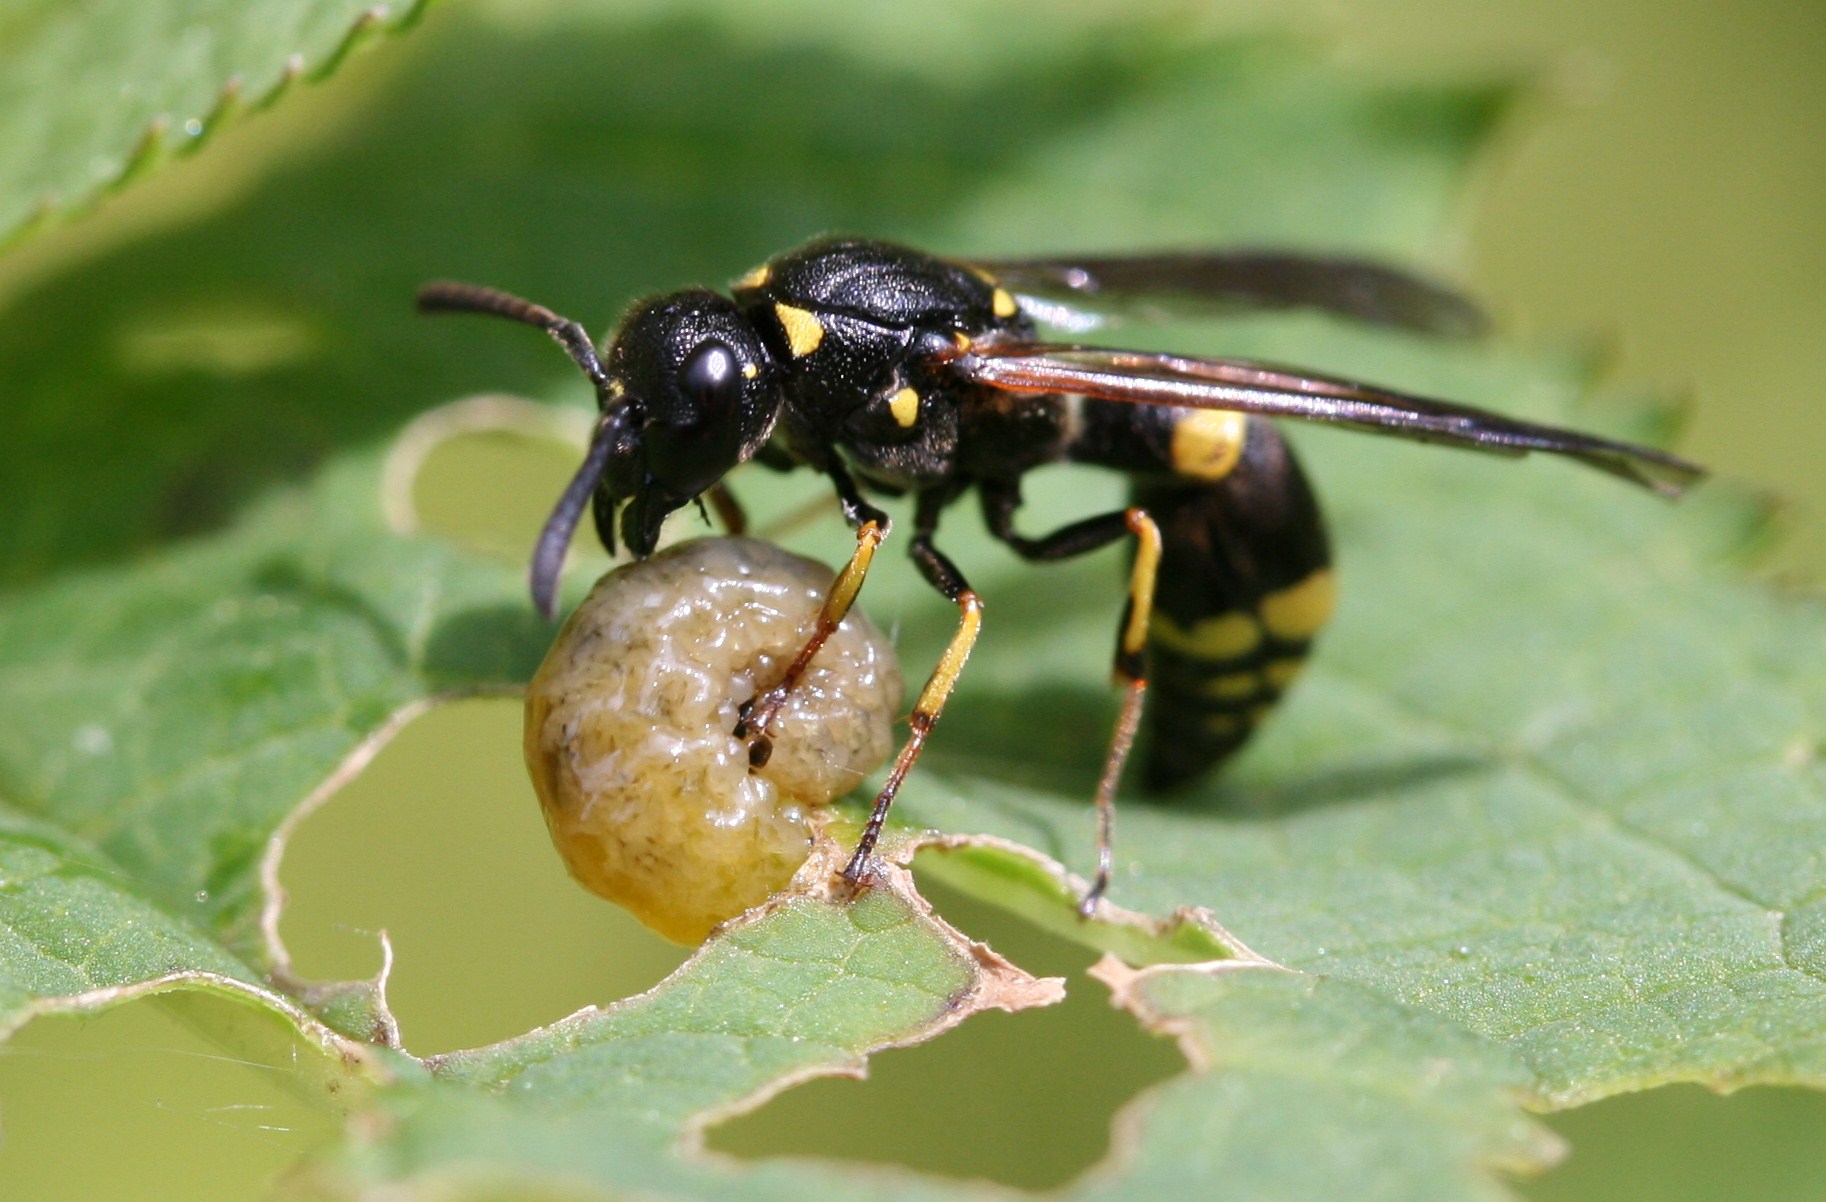 Here, a female Symmorphus gracilis administers a punishing to a Cionus sp. larva. There can only be one conclusion